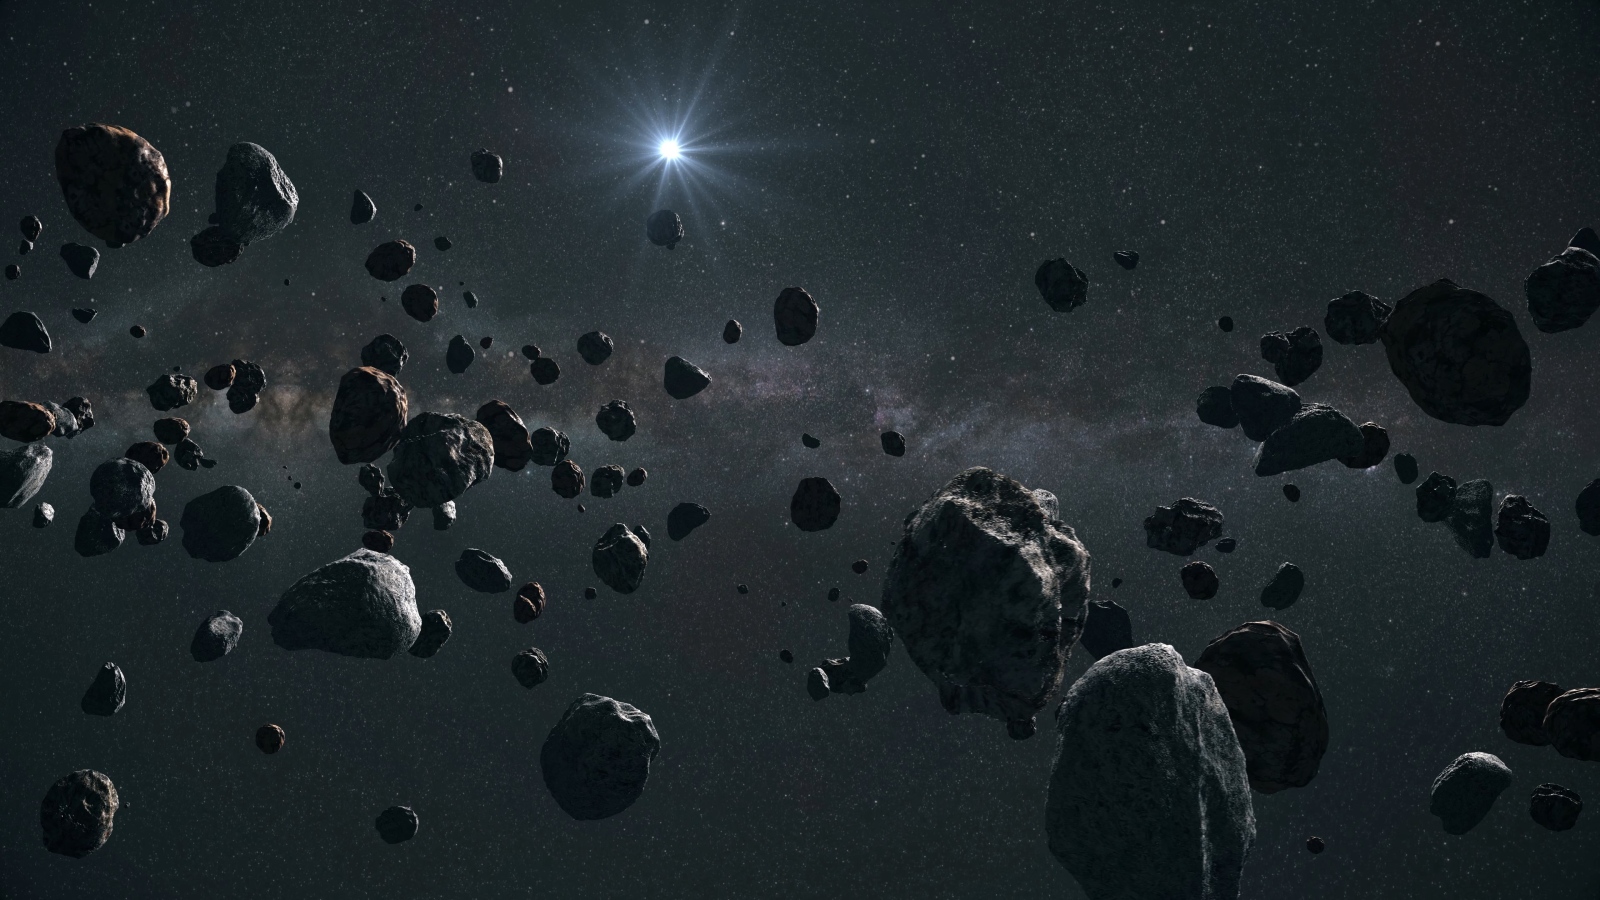 Potential discovery of a dozen objects beyond Pluto could reveal a new section of the solar system we never knew about